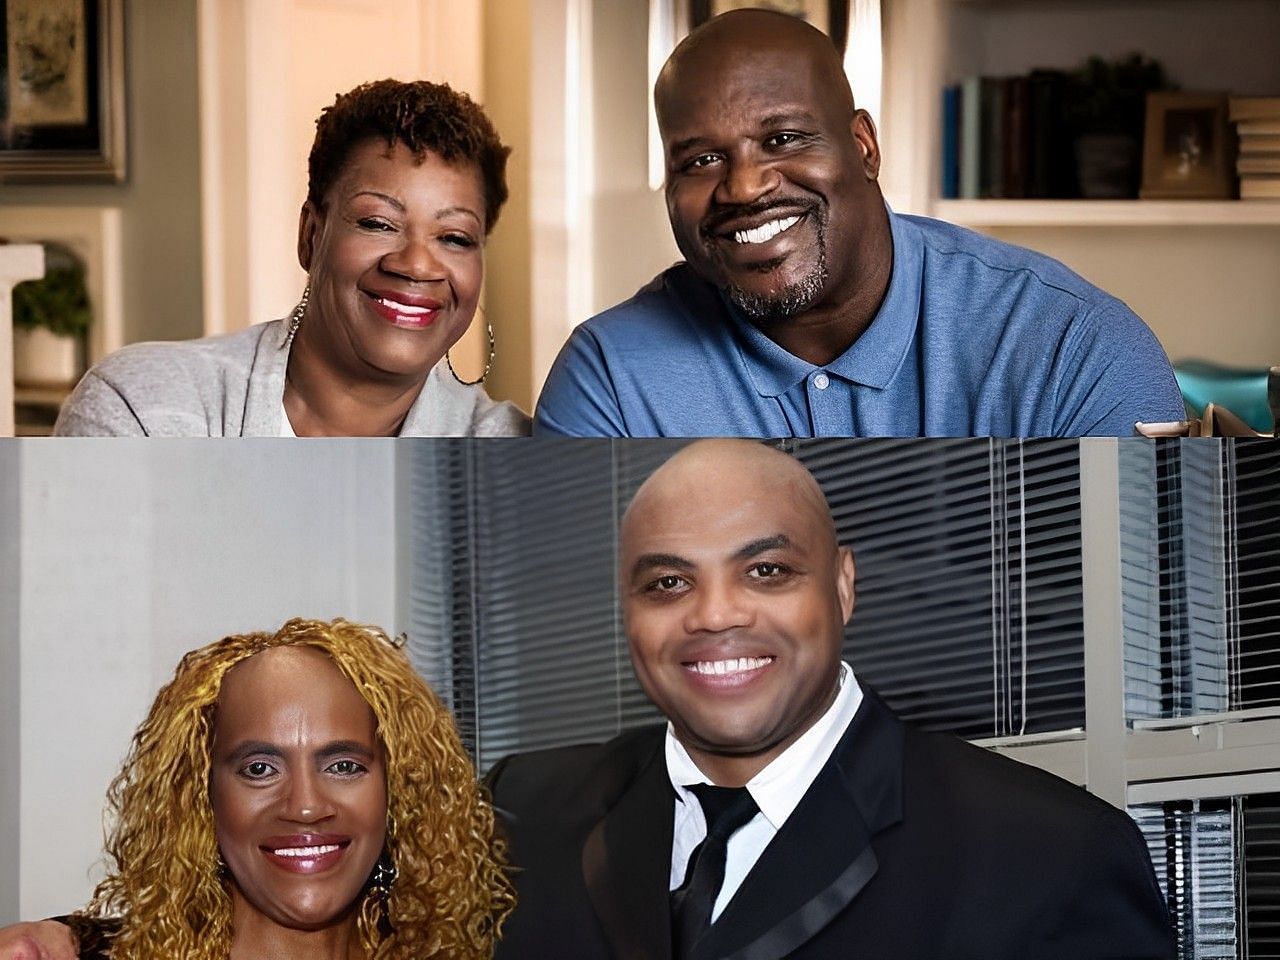 NBA legends-turned-TNT analysts Shaquille O&rsquo;Neal and Charles Barkley with their mothers Lucille O